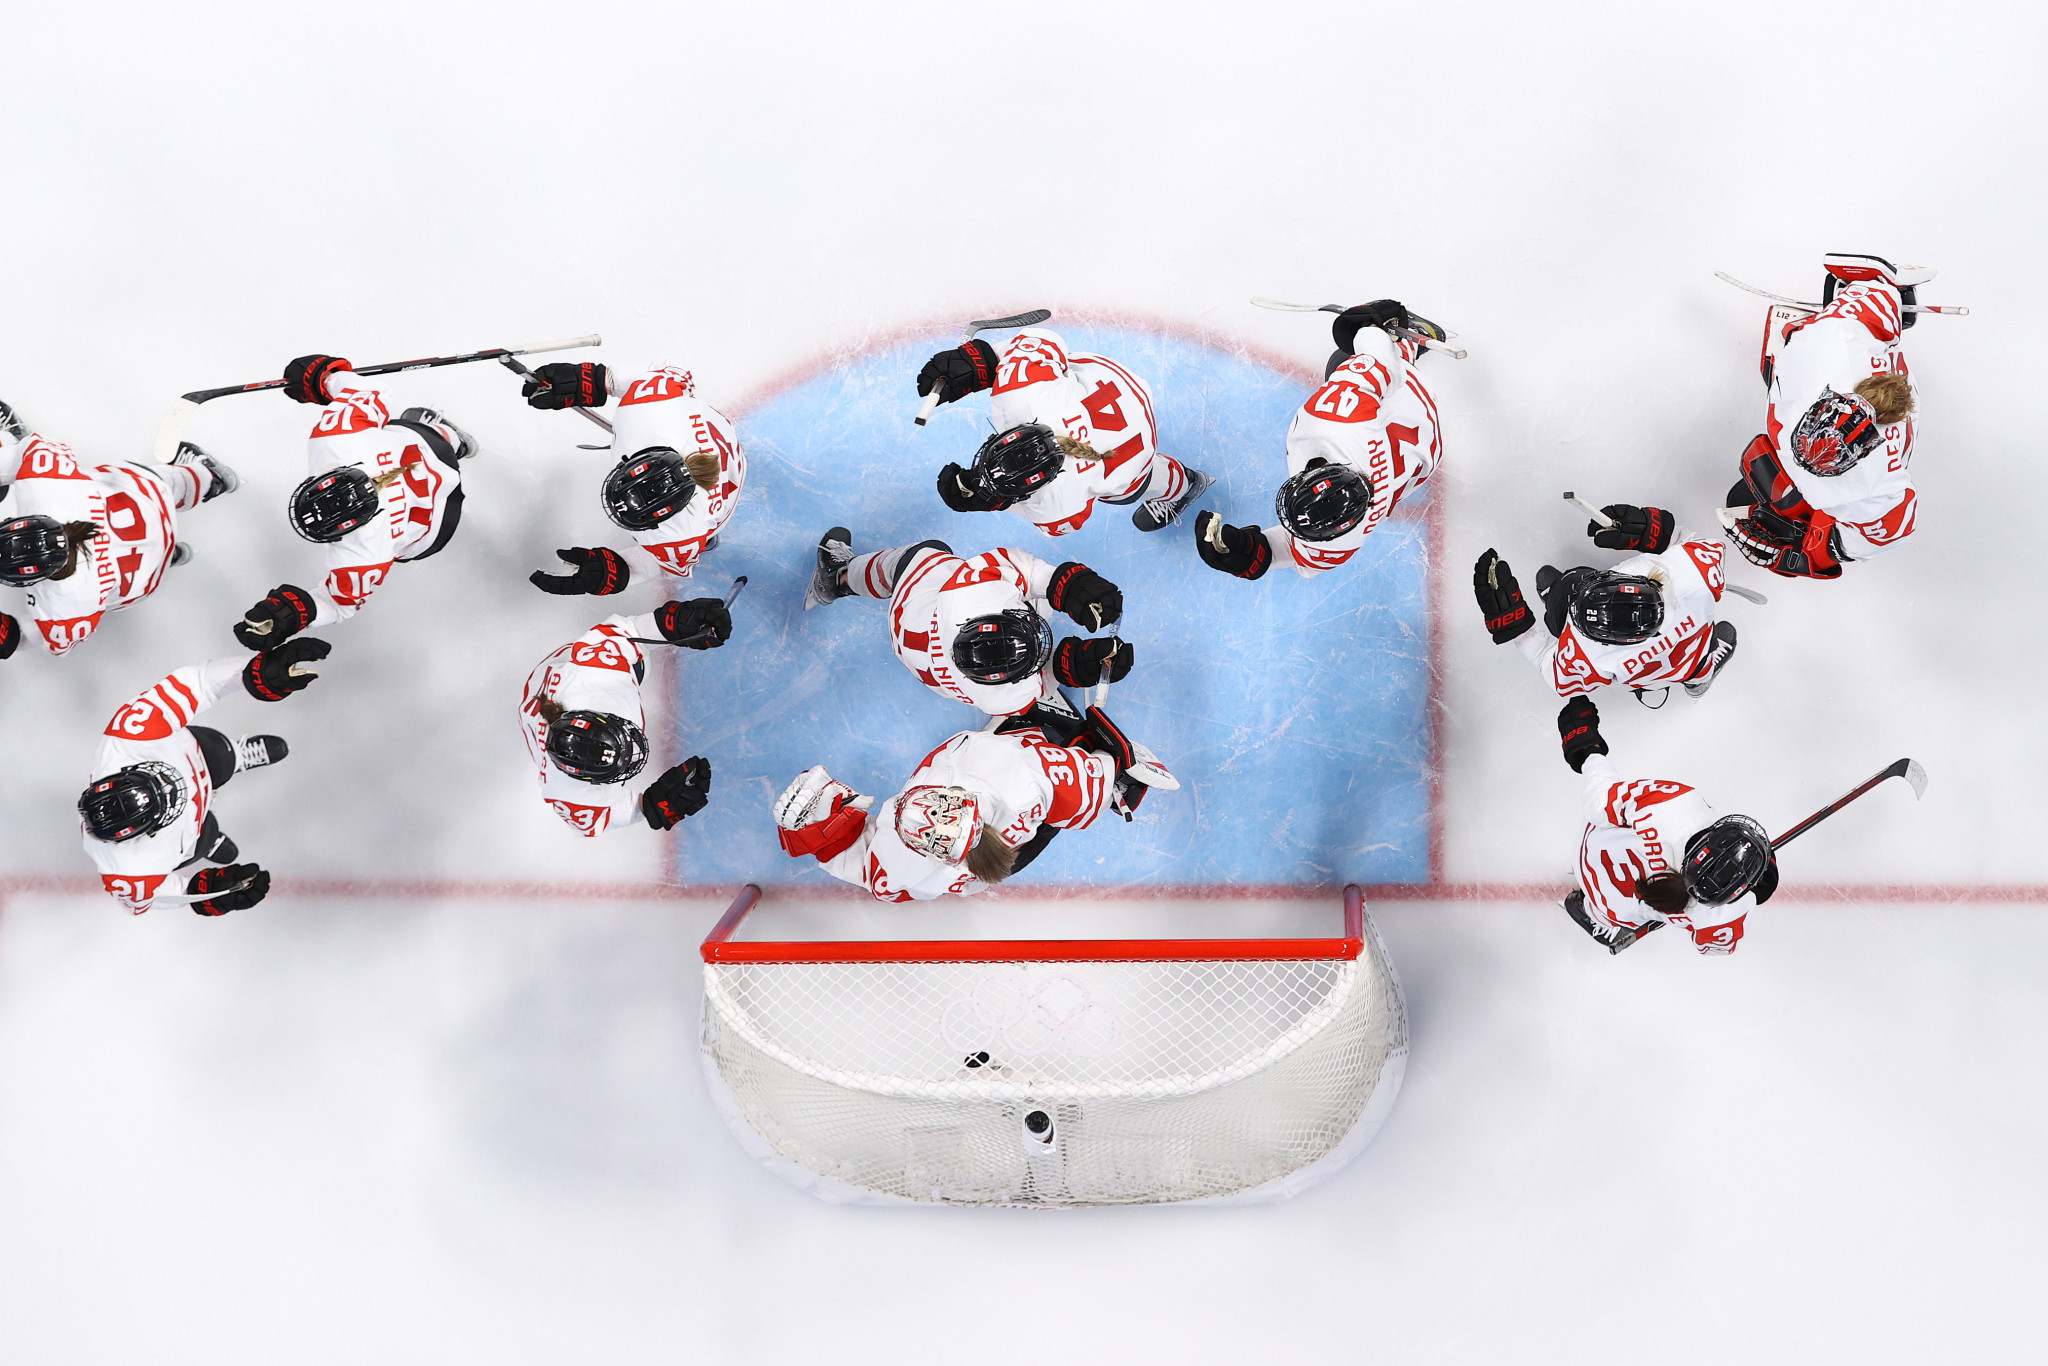 Hockey Canada is looking to improve its image after recent scandals ©Getty Images